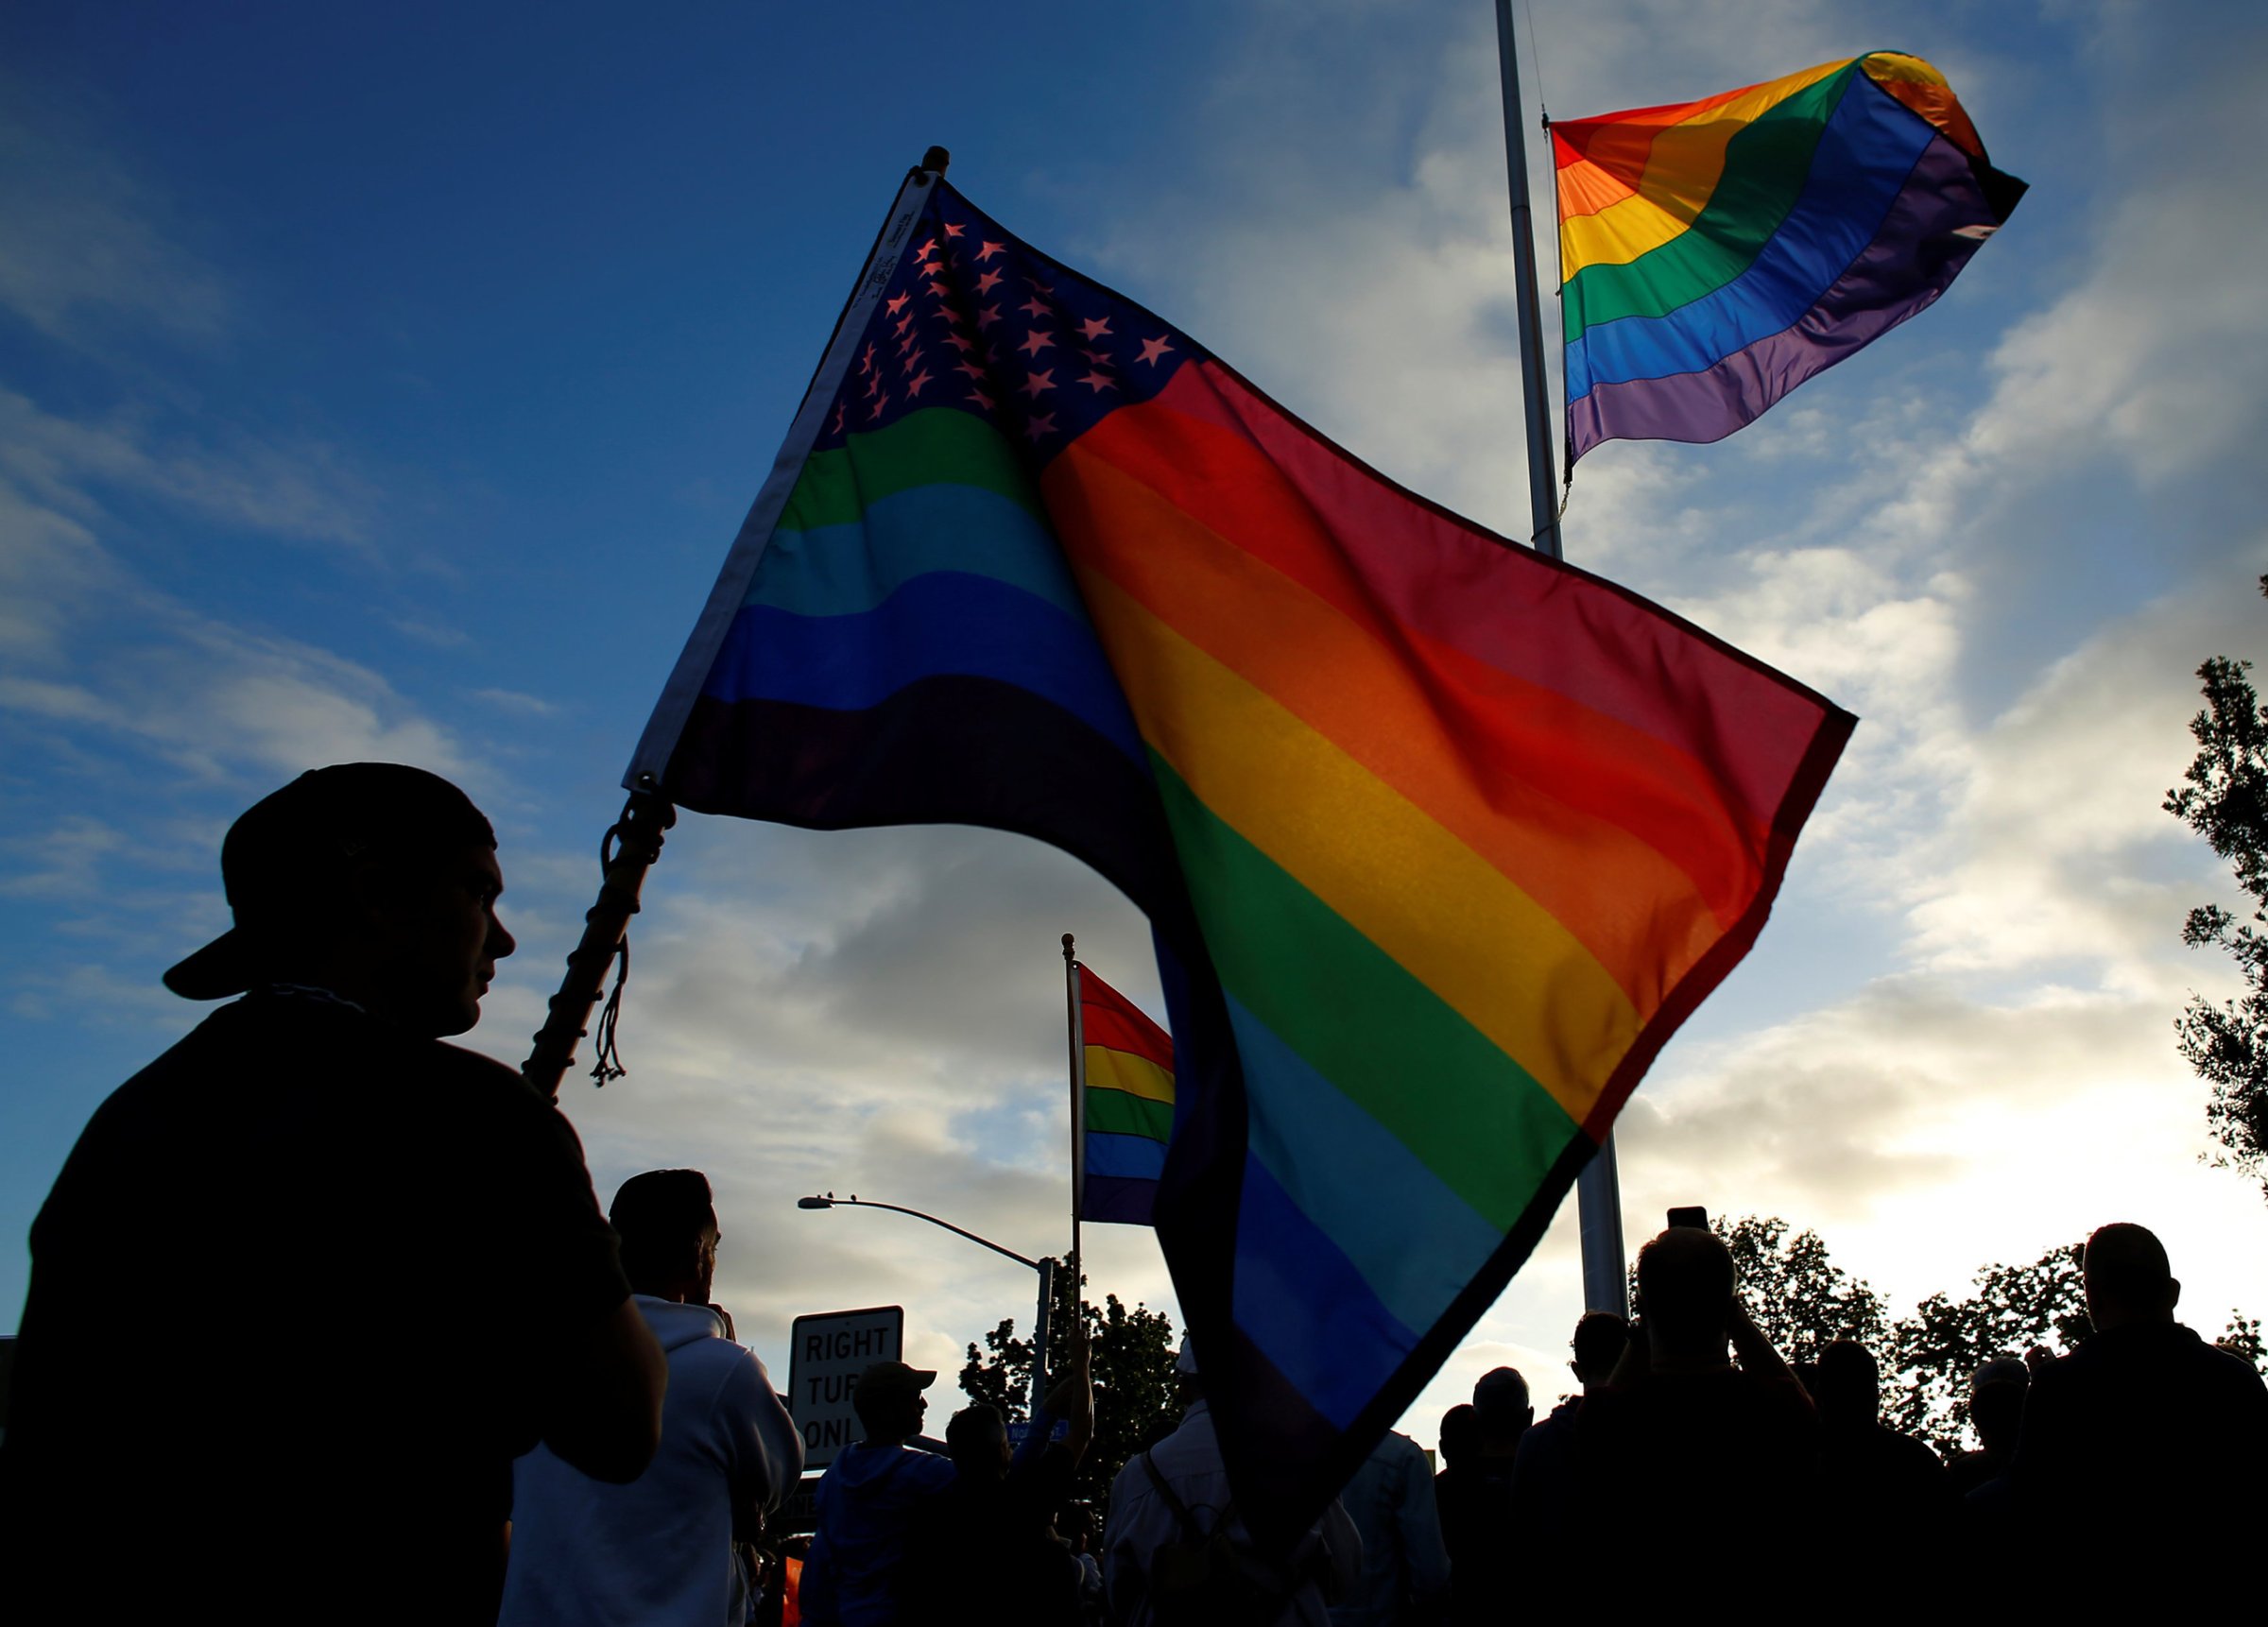 Mourners gather under an LGBT pride flag flying at half-mast for a candlelight vigil in remembrance for mass shooting victims in Orlando, from San Diego, June 12, 2016.